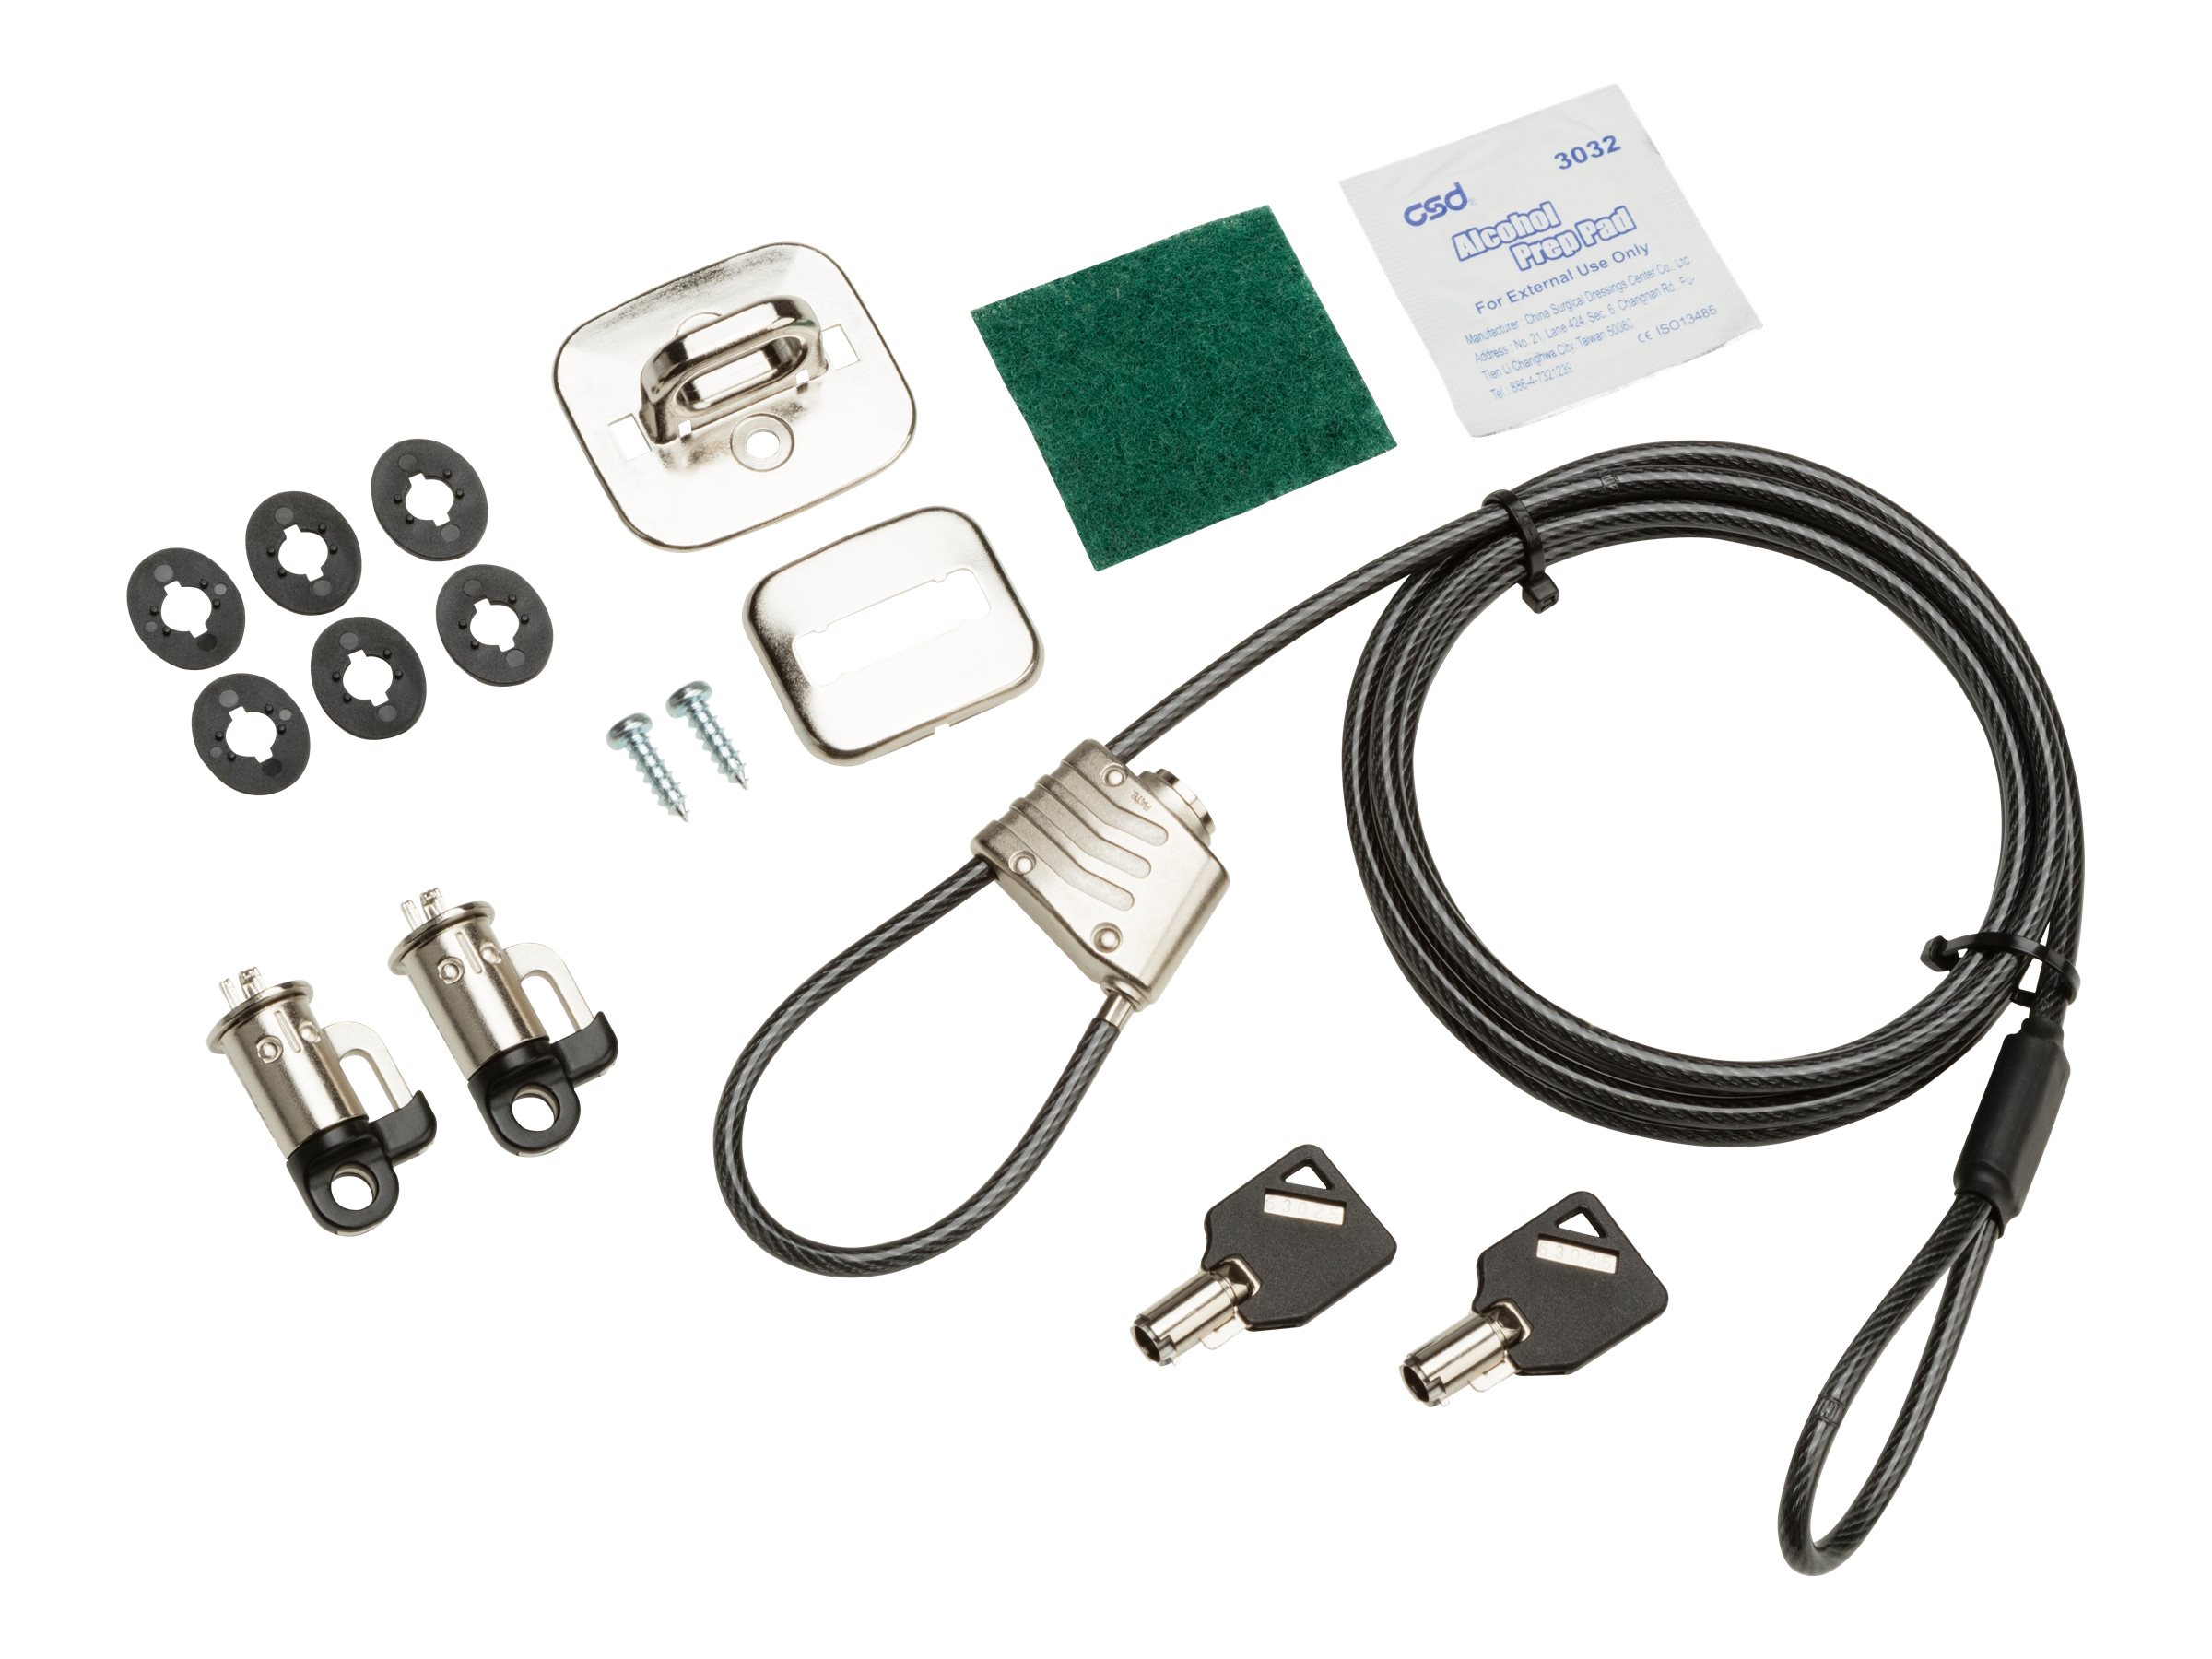 HP Business PC Security Lock v3 Kit - Sicherheitskit - für HP 280 G3, 280 G4, 285 G3, 290 G1, 290 G2, 290 G3; Desktop Pro A 300 G3, Pro A G2; EliteDesk 705 G4 (micro tower, SFF), 705 G5 (SFF), 800 G4 (SFF, tower), 800 G5 (SFF, tower); ProDesk 400 G5...